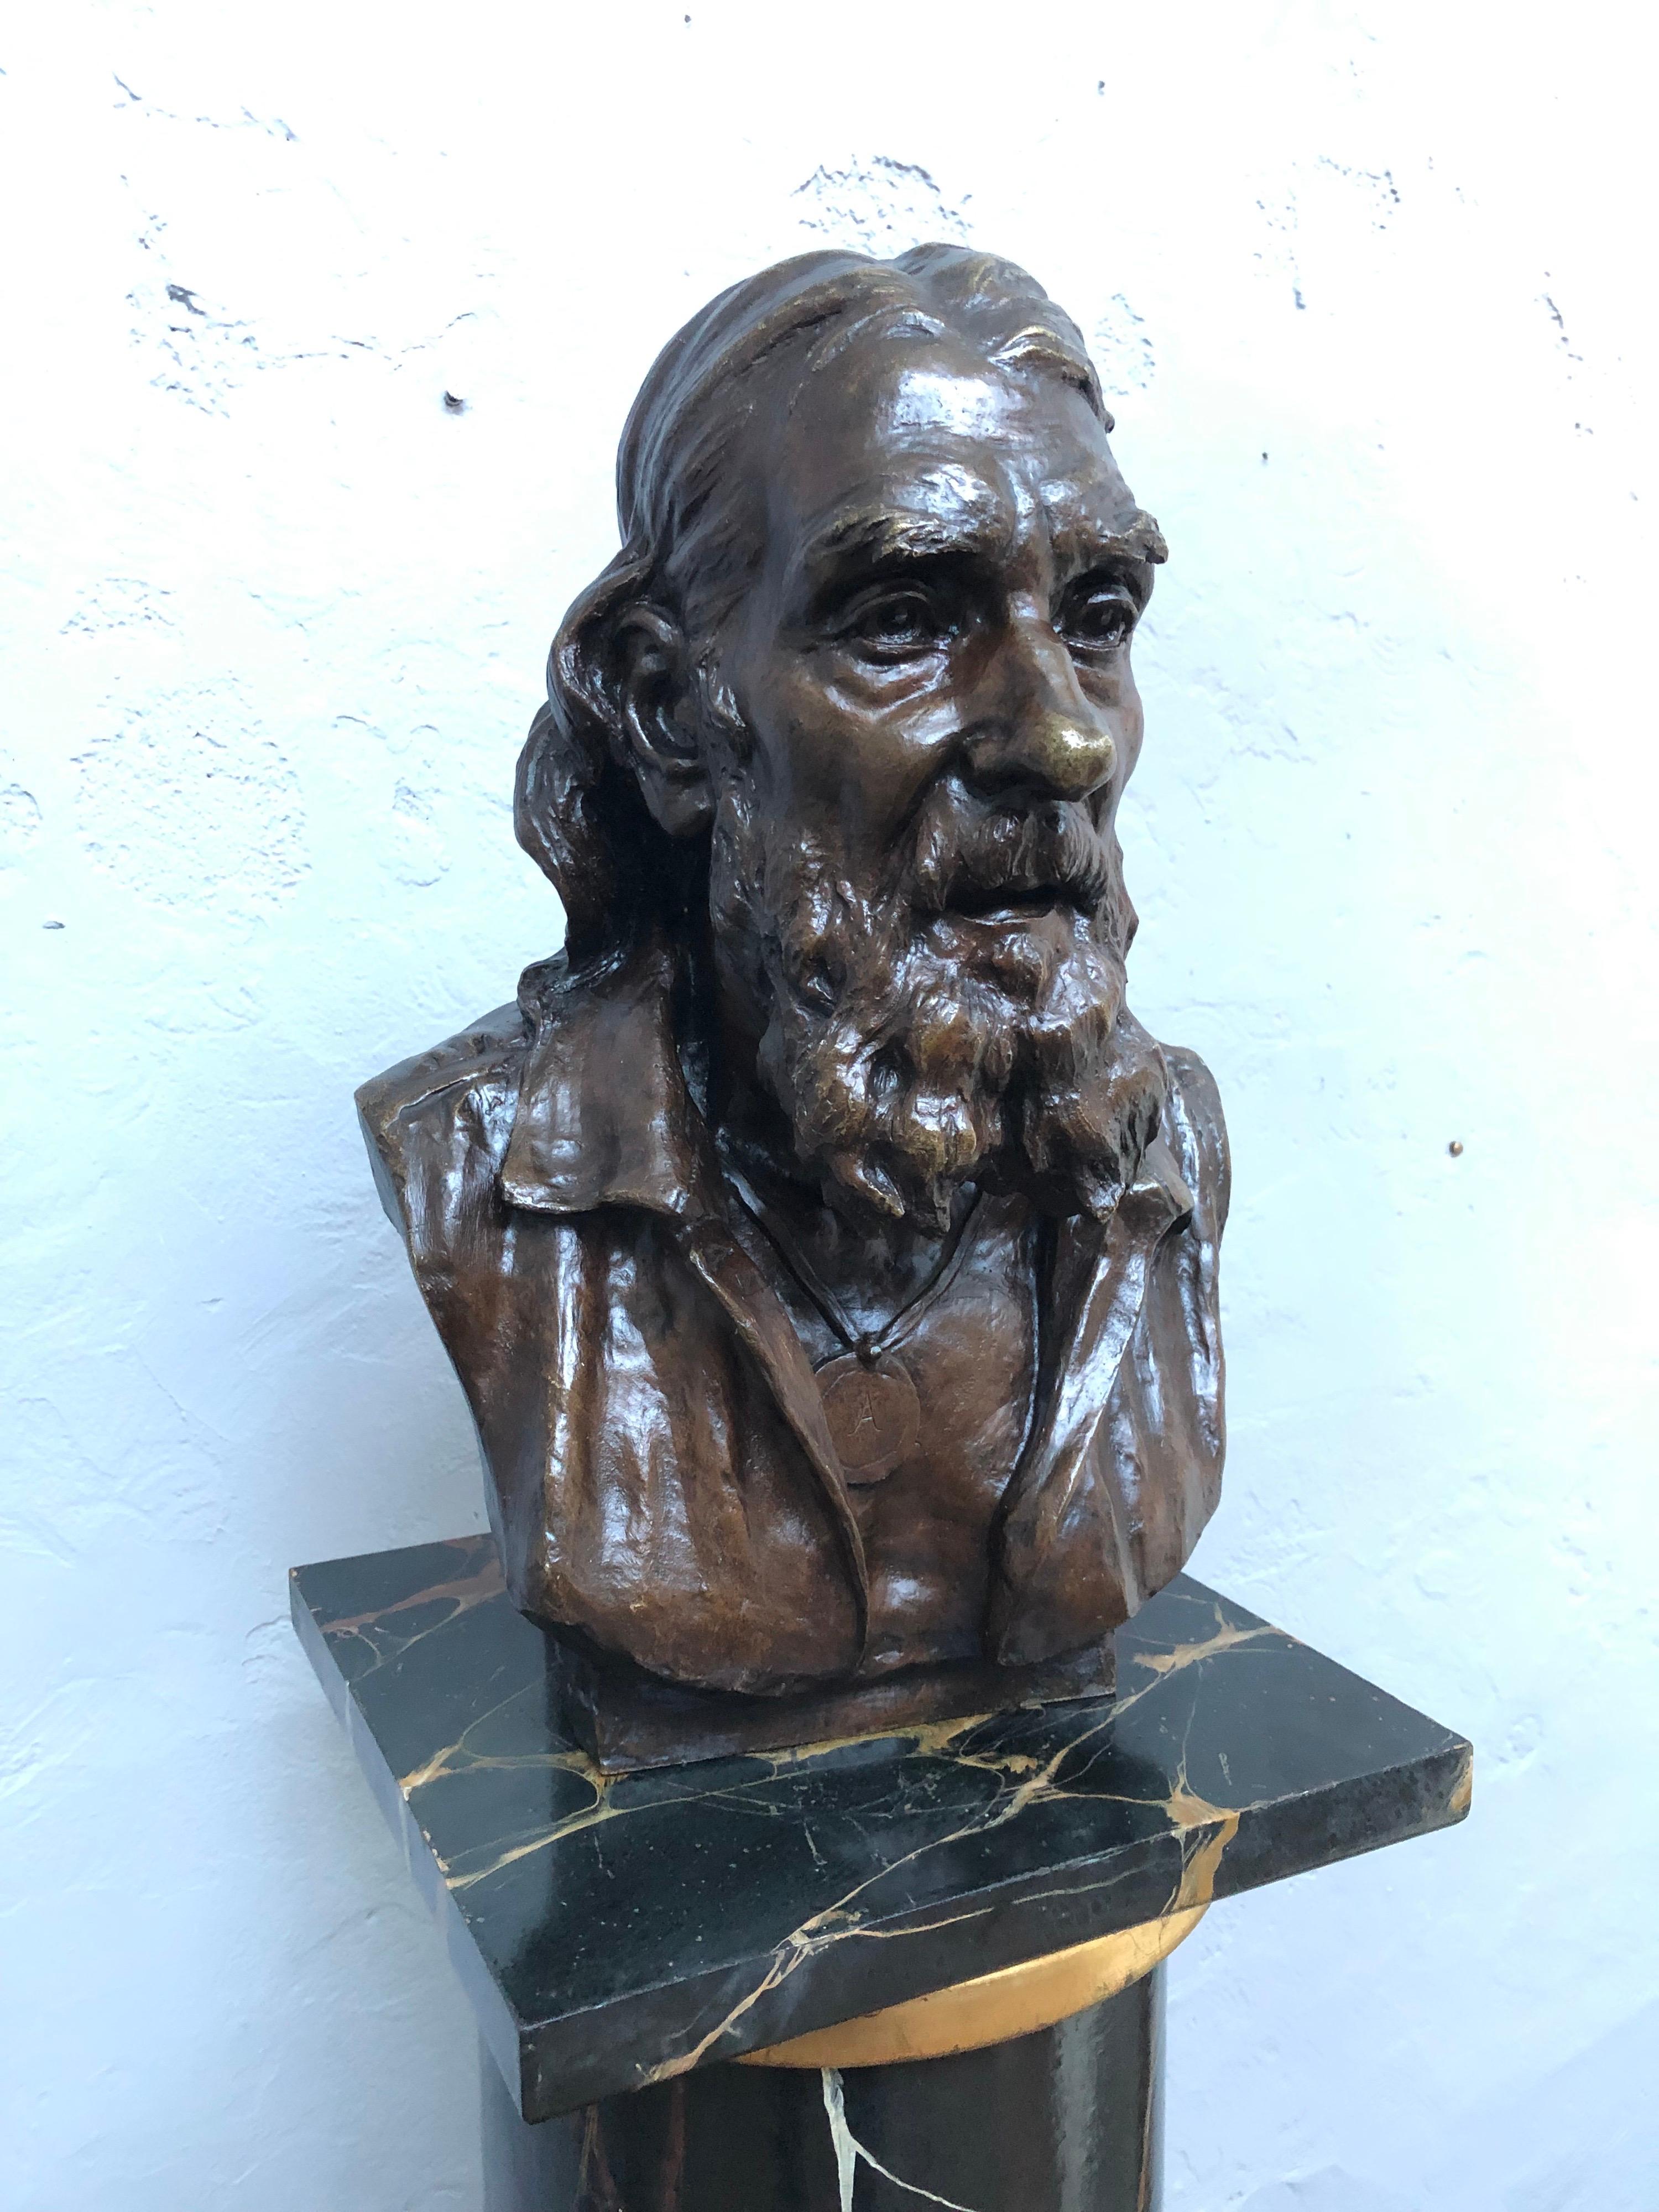 A vintage bronze bust of Armand Petersen. 
Judging by his appearance it could be just after his death in 1969. 
Or it could be a selv portrait just before his death. 
The latter is most likely as it has the date of his birth and not the date of his